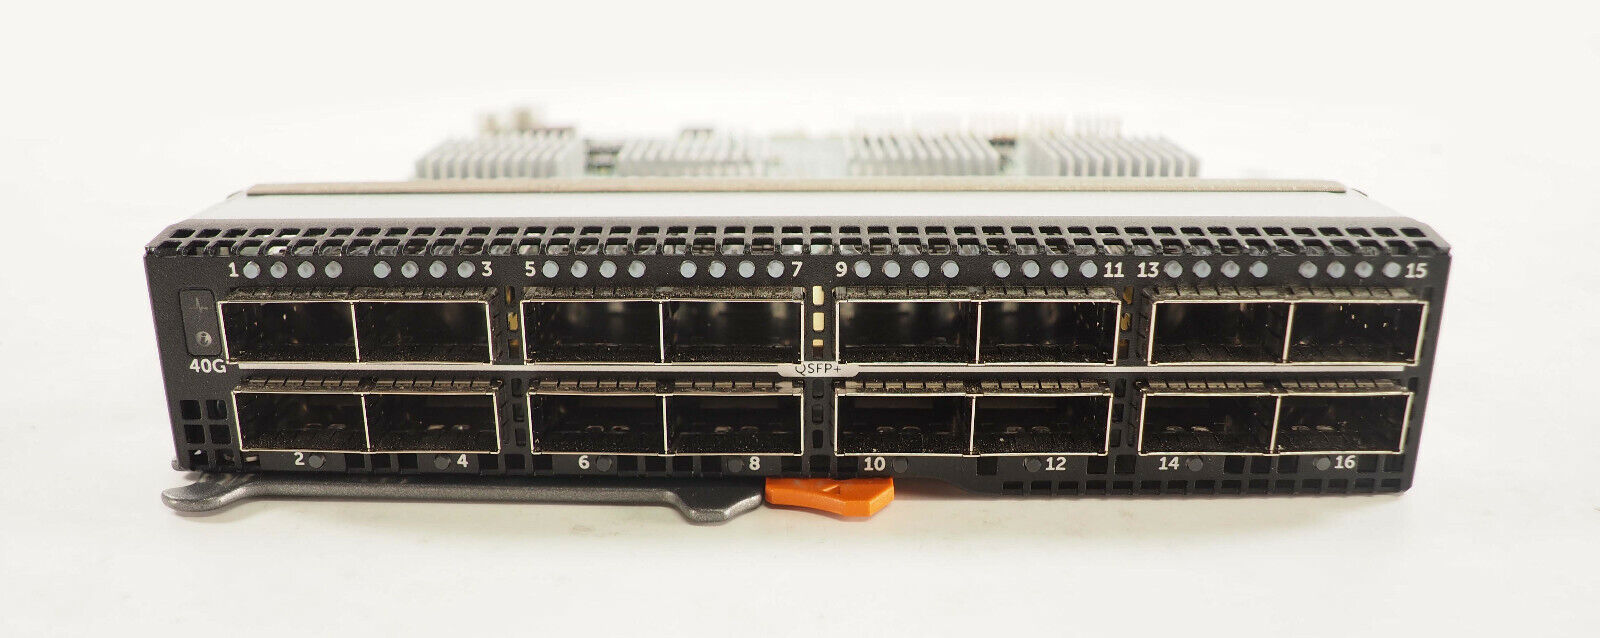  Dell 00NYND 16x 40GbE QSFP+ Network Switch Module for Dell Networking S6100-ON